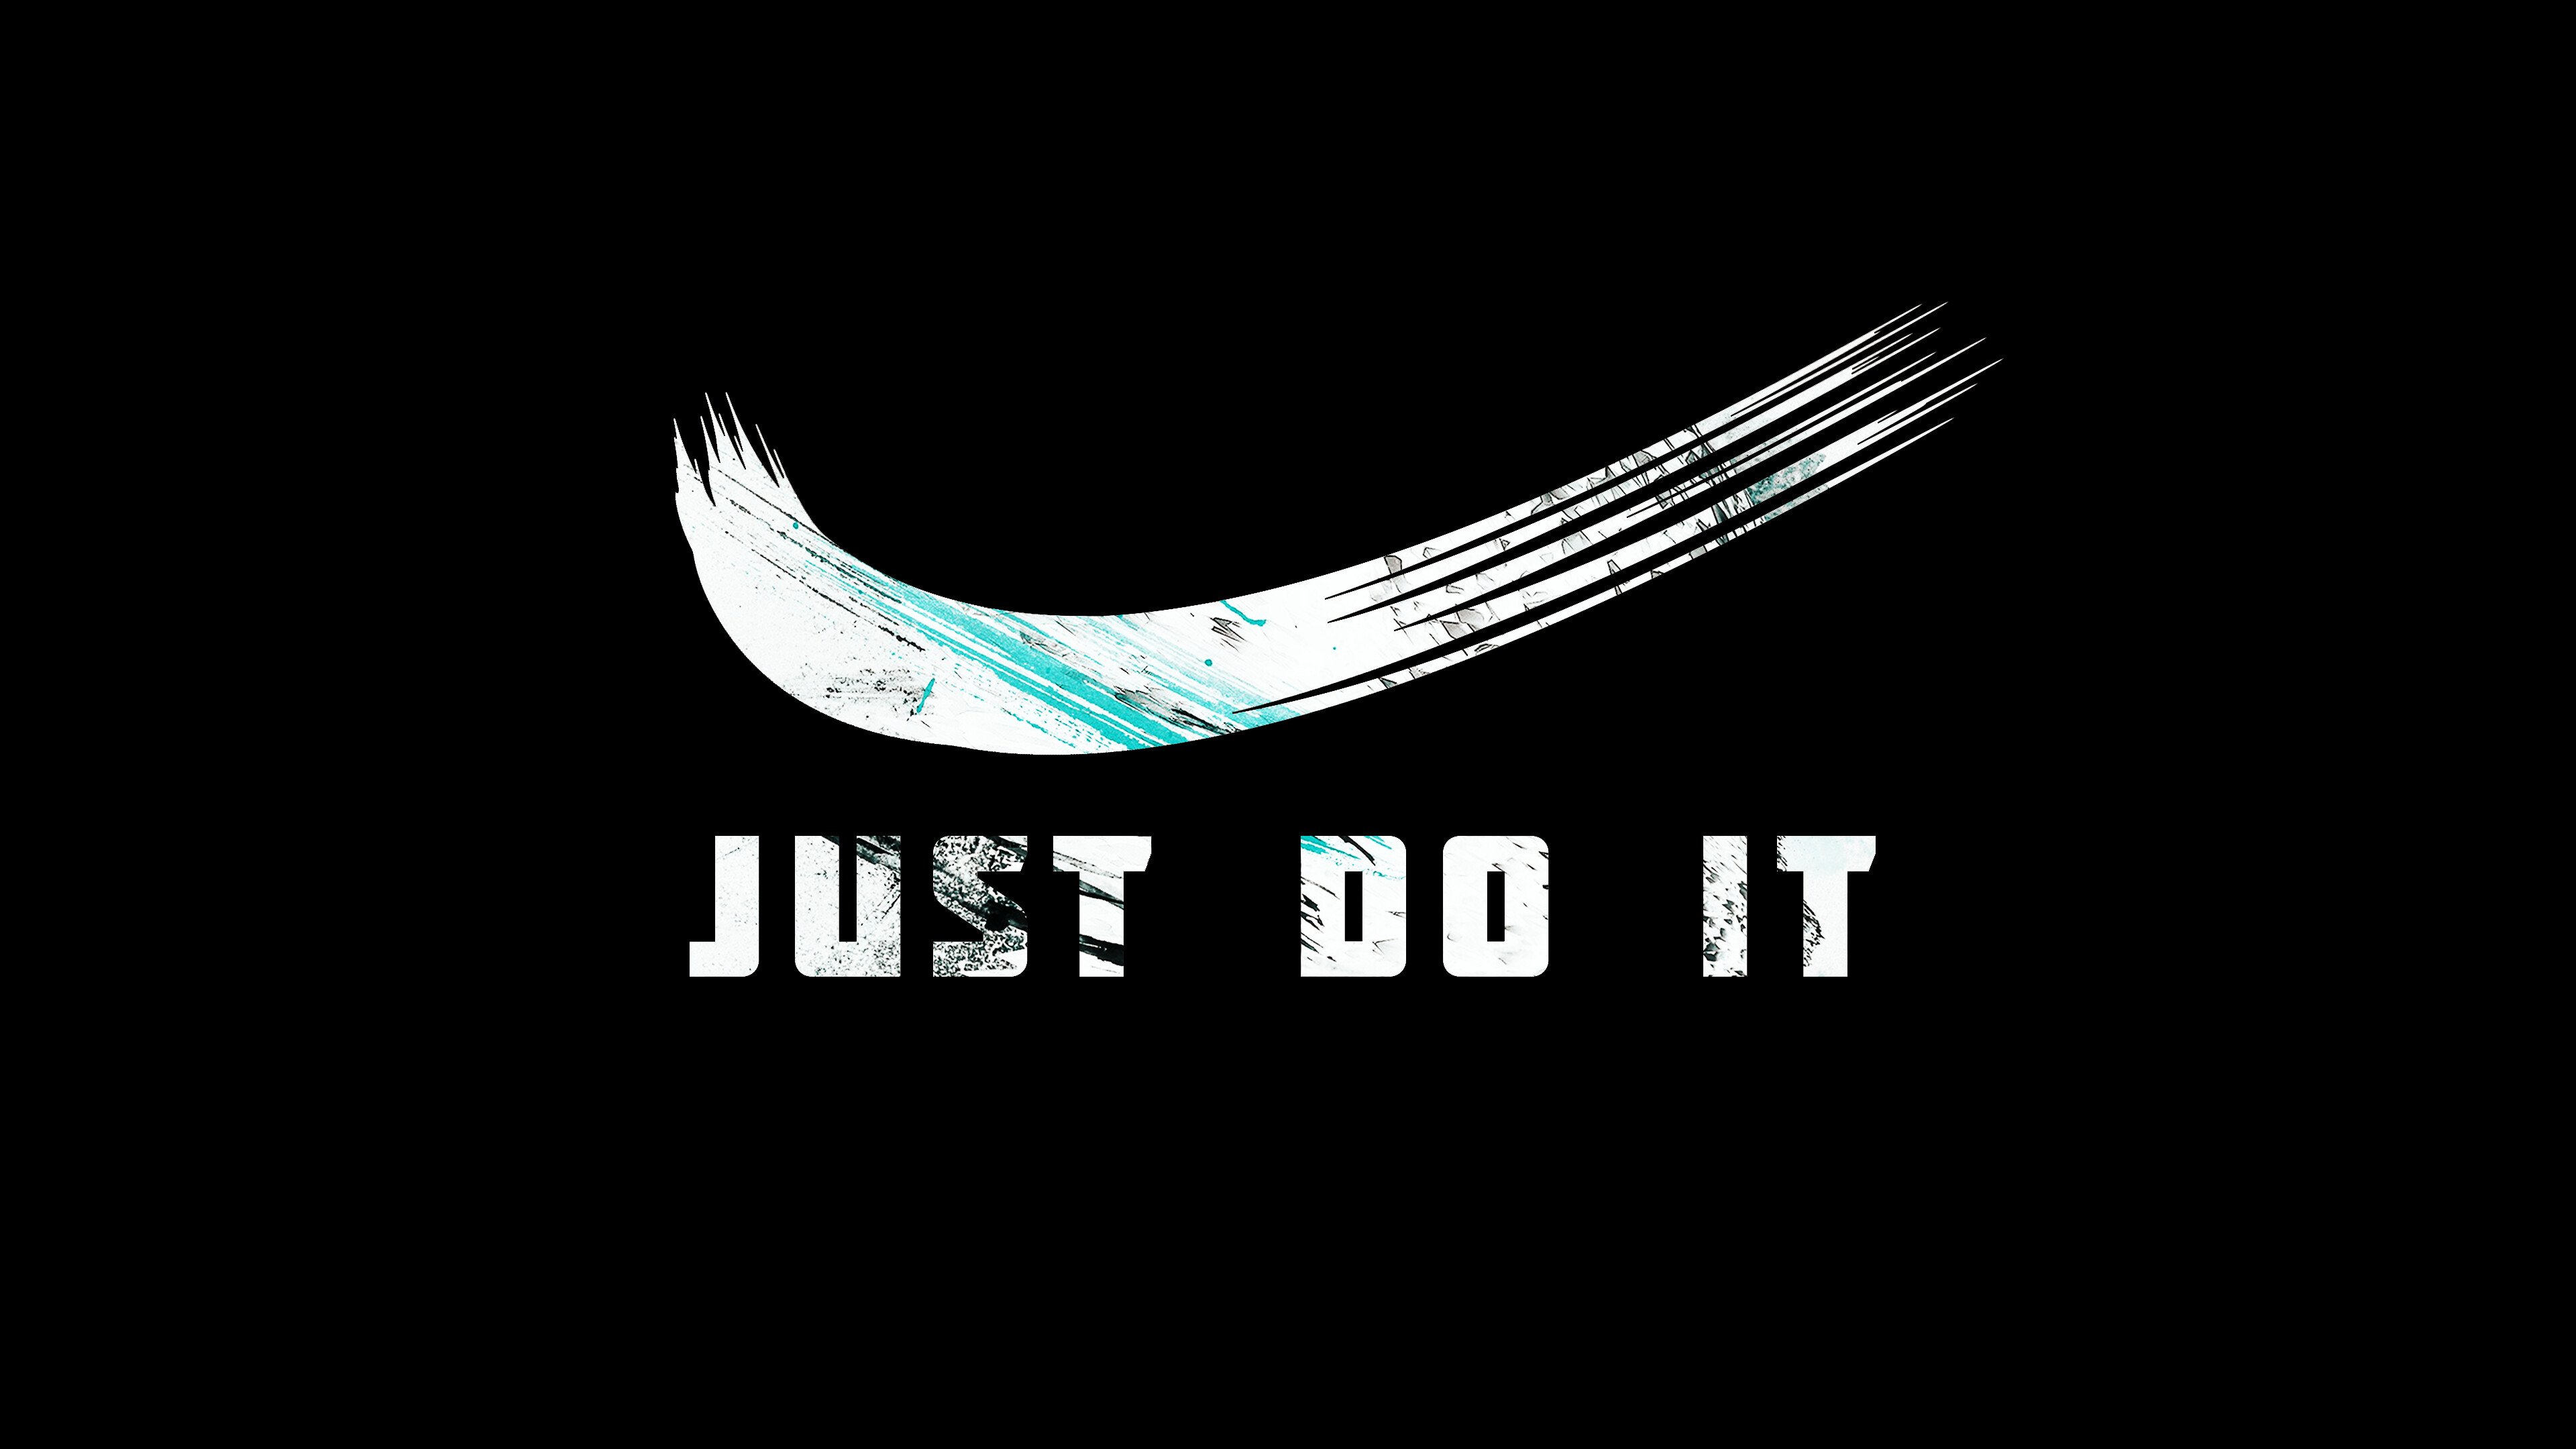 Nike: Just Do It, Trademark, Slogan coined in 1988. 3840x2160 4K Wallpaper.